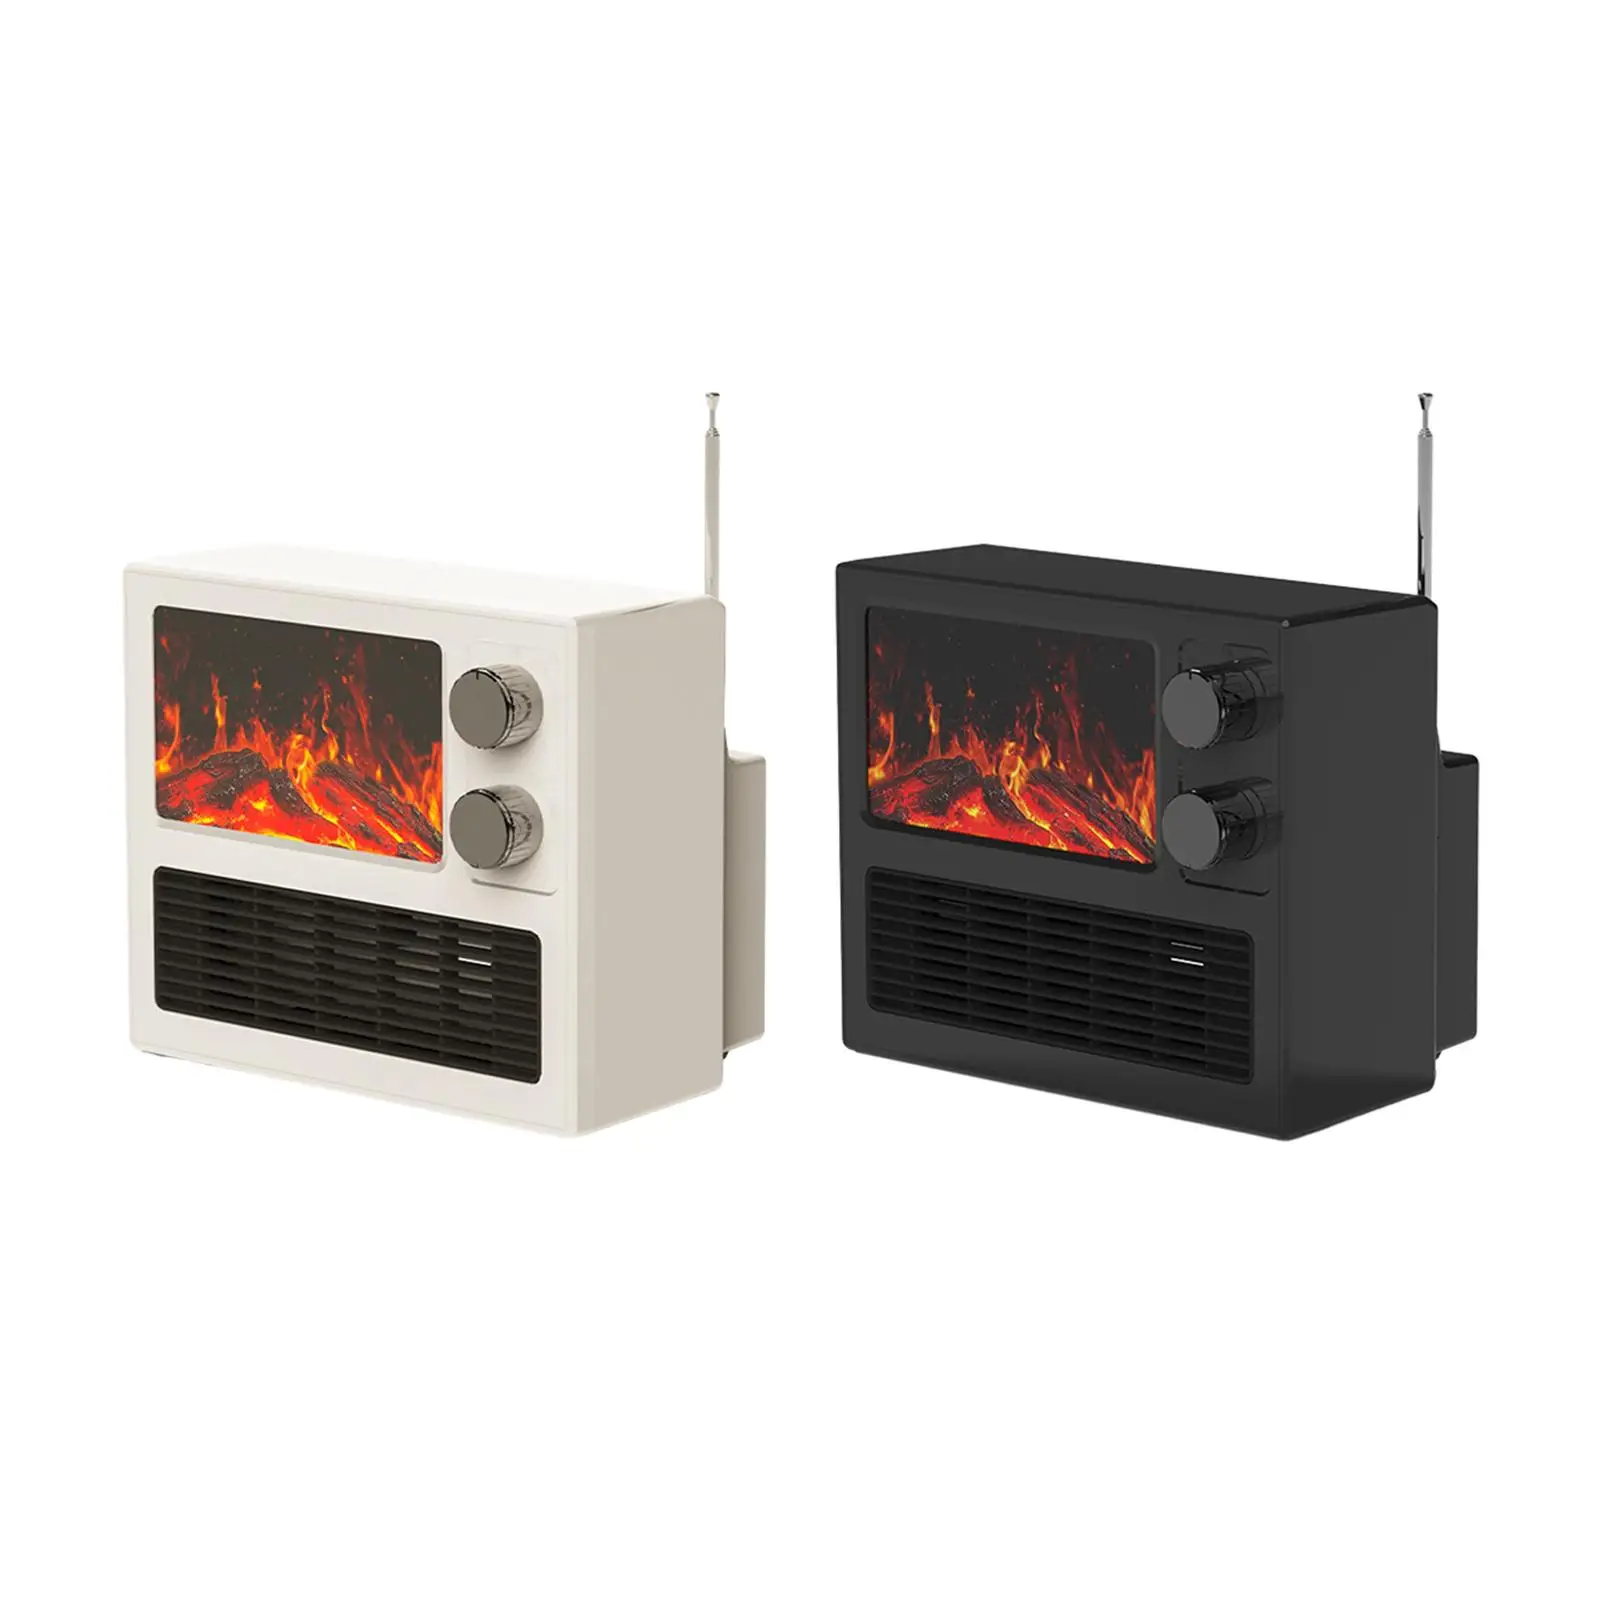 Small Electric Fireplace Freestanding Tabletop Silent Fast Heating Space Heater for Home Living Room Bedroom Apartment Dormitory